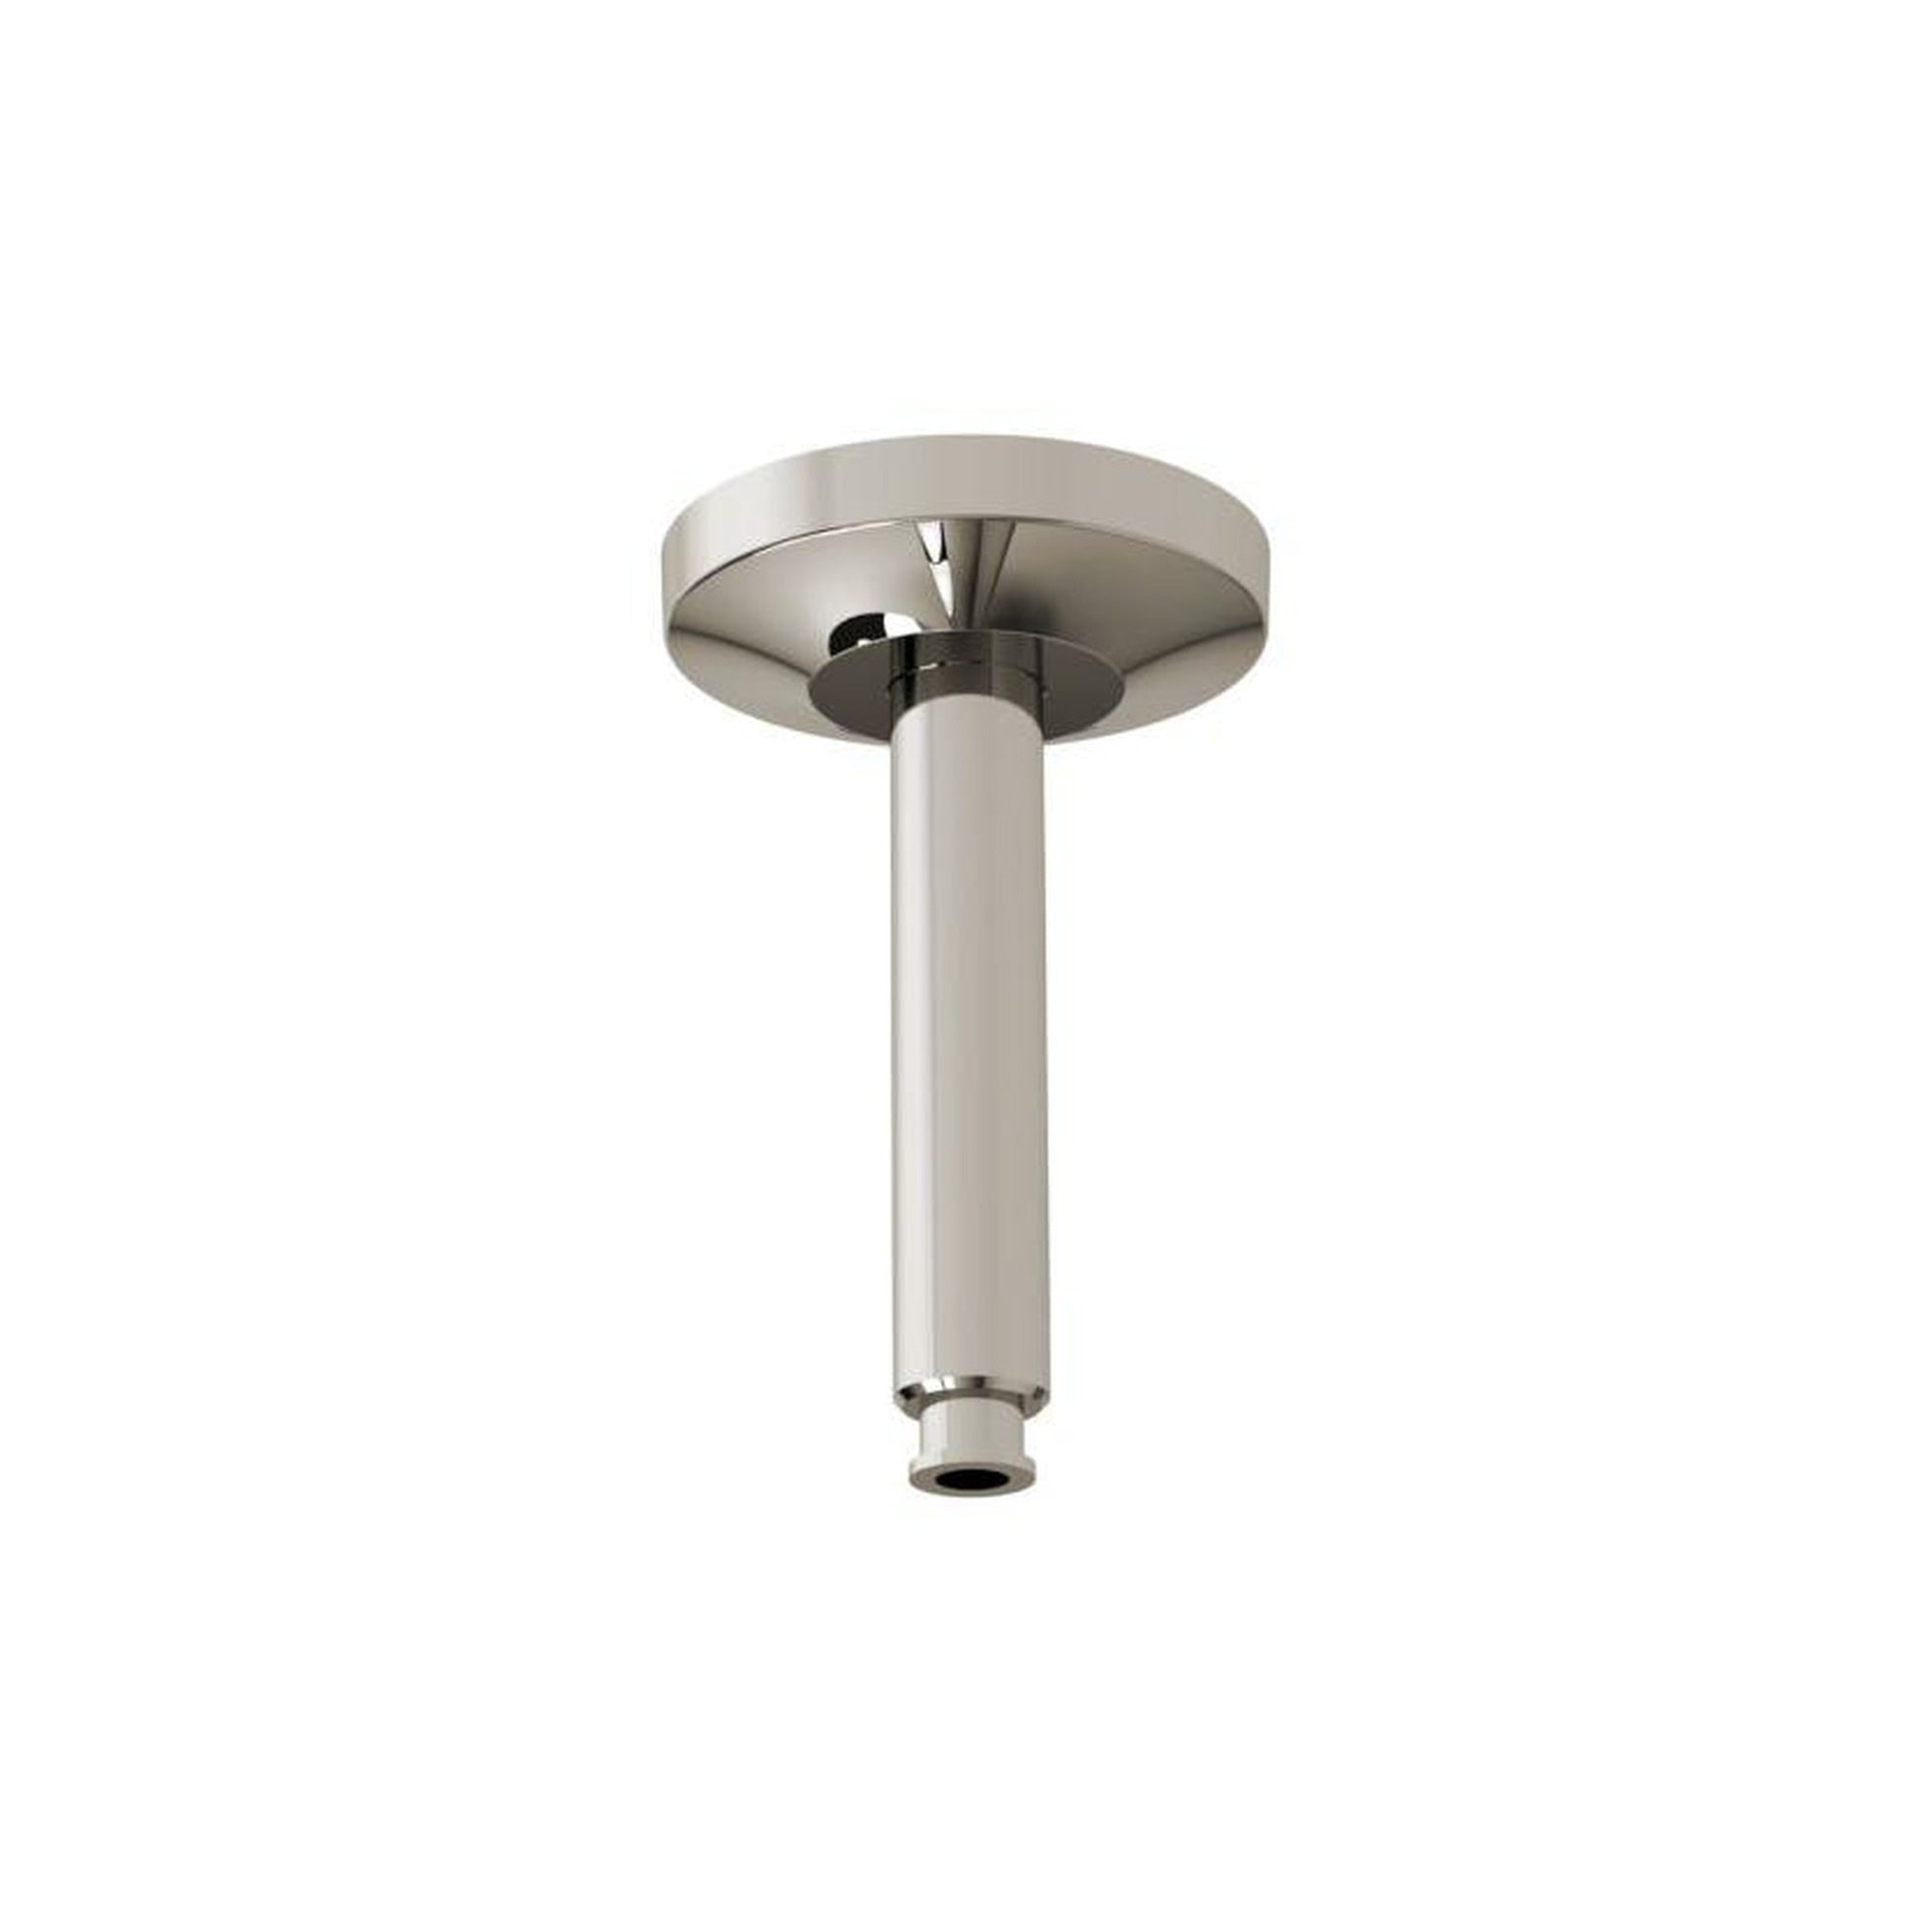 Toto 6” Rain Shower Arm Ceiling-Mnt Polished Nickel